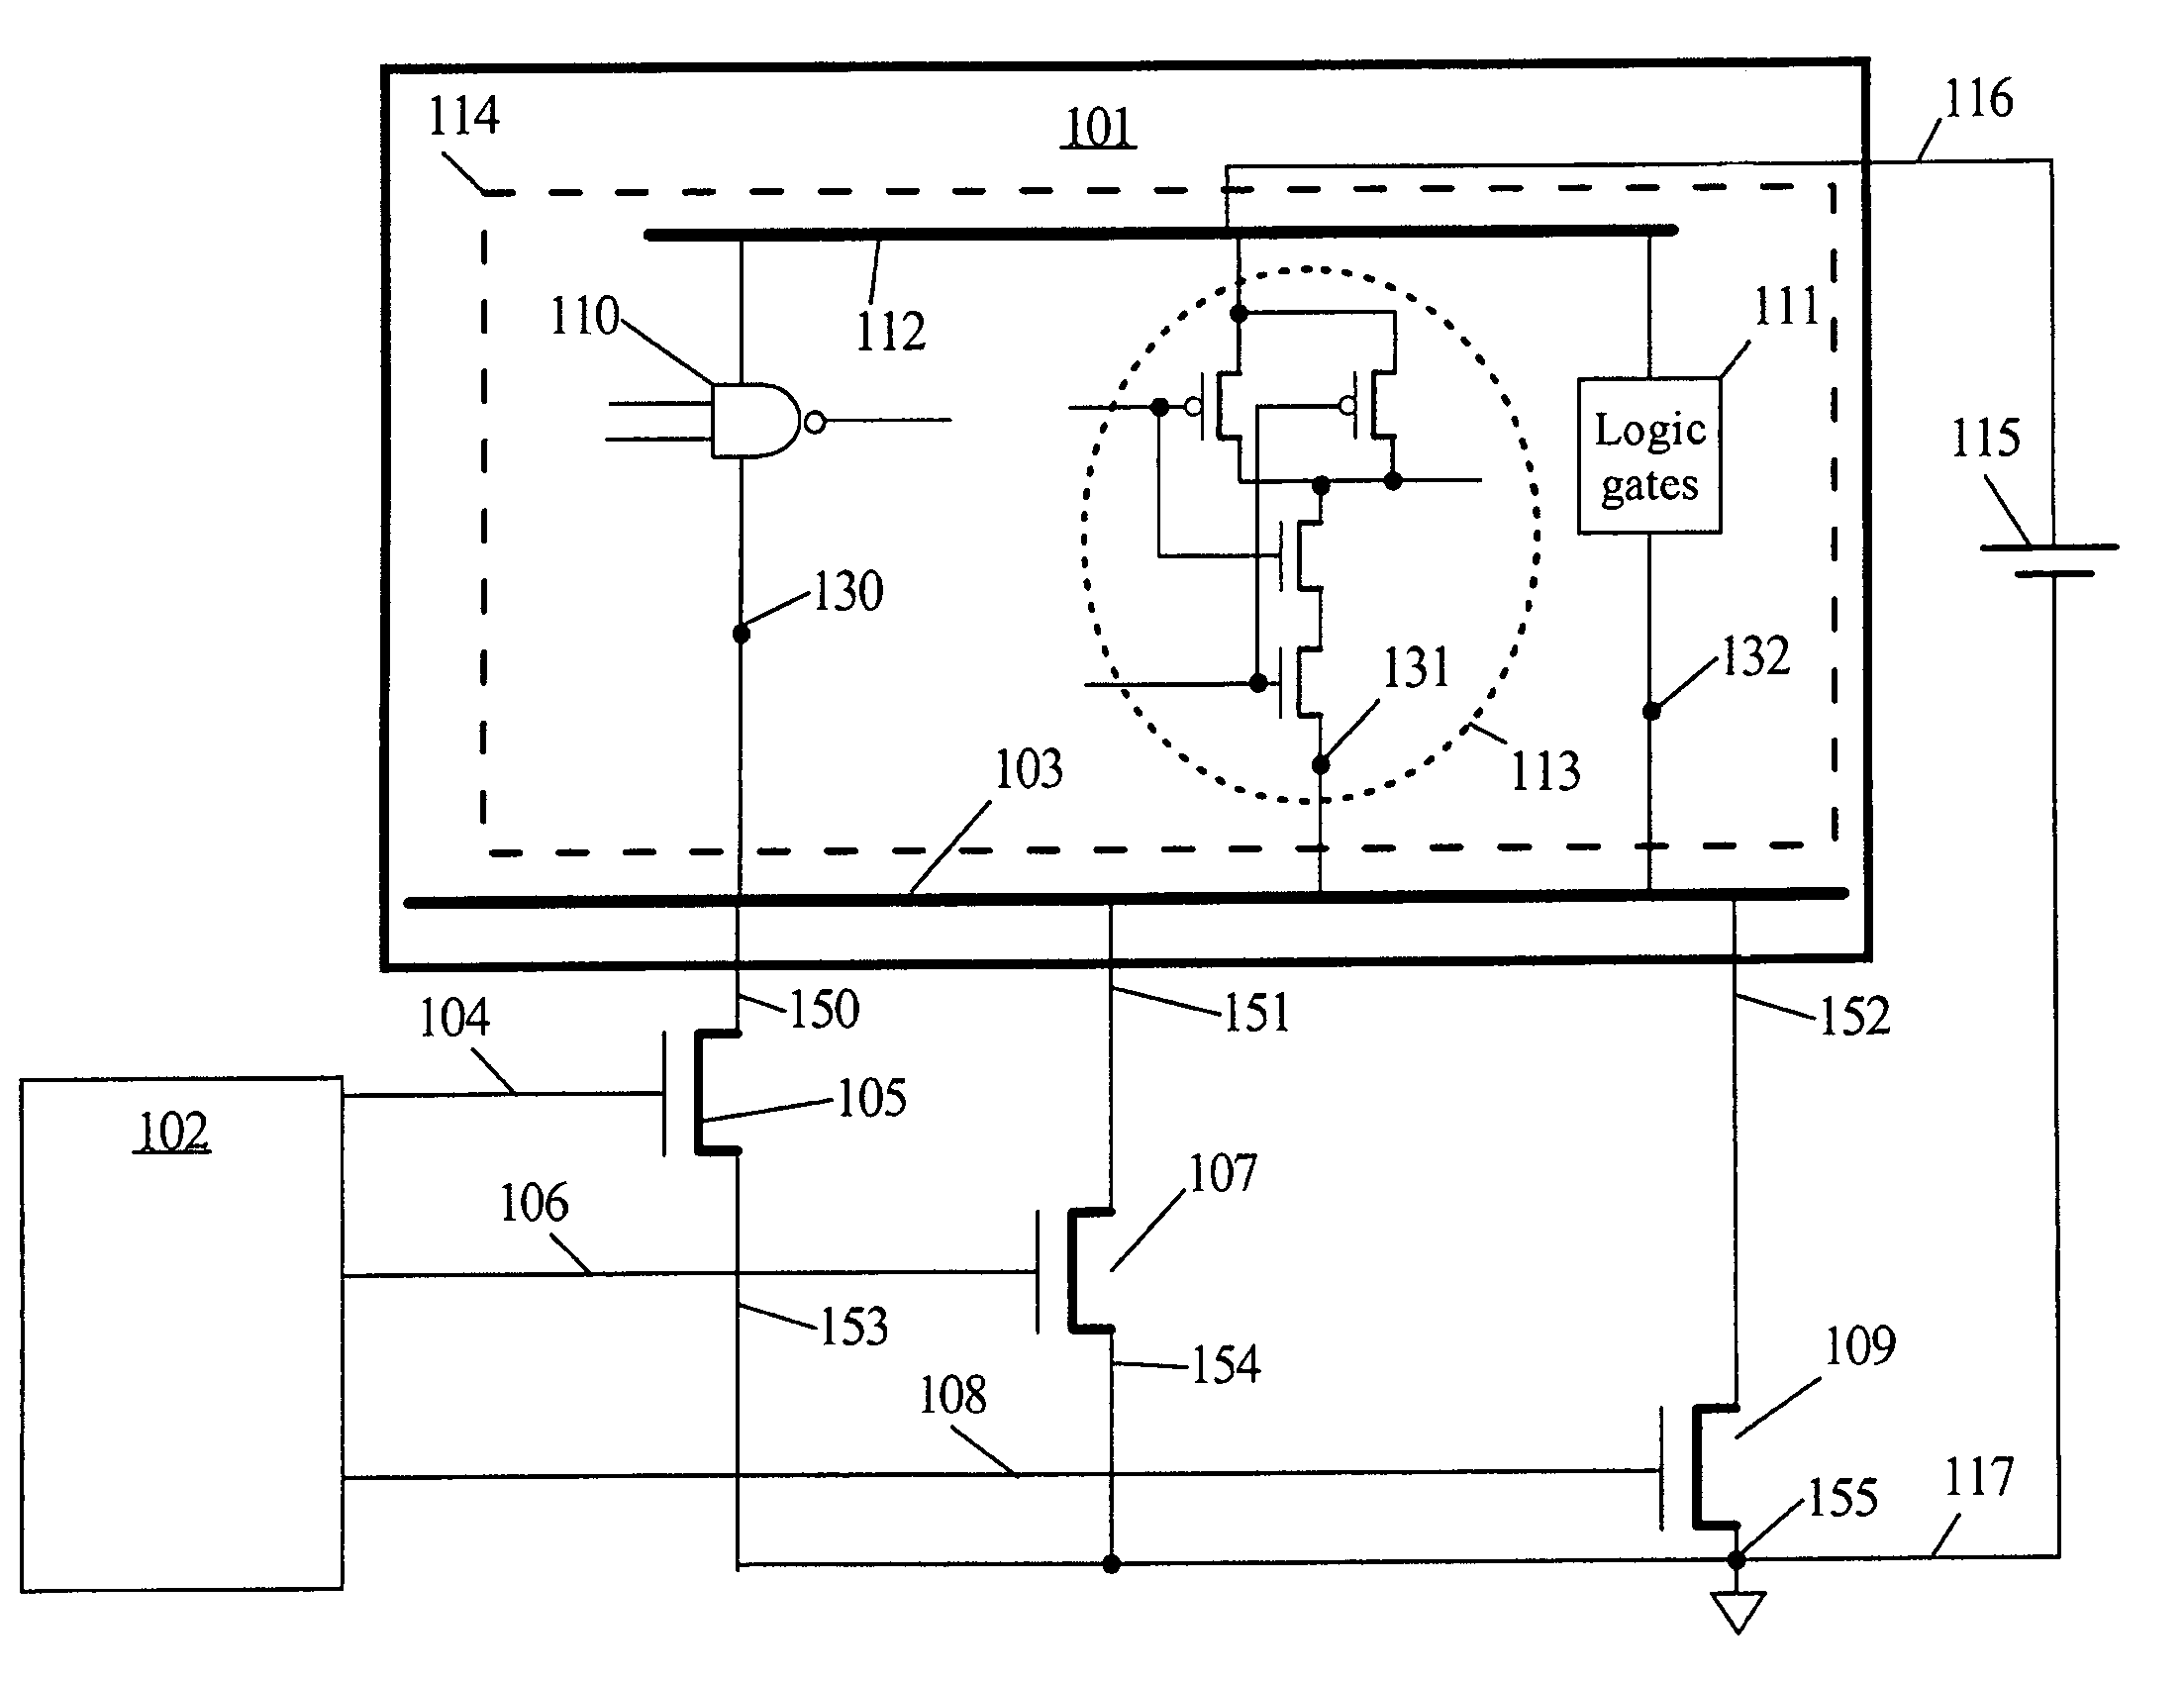 Control circuitry for power gating virtual power supply rails at differing voltage potentials